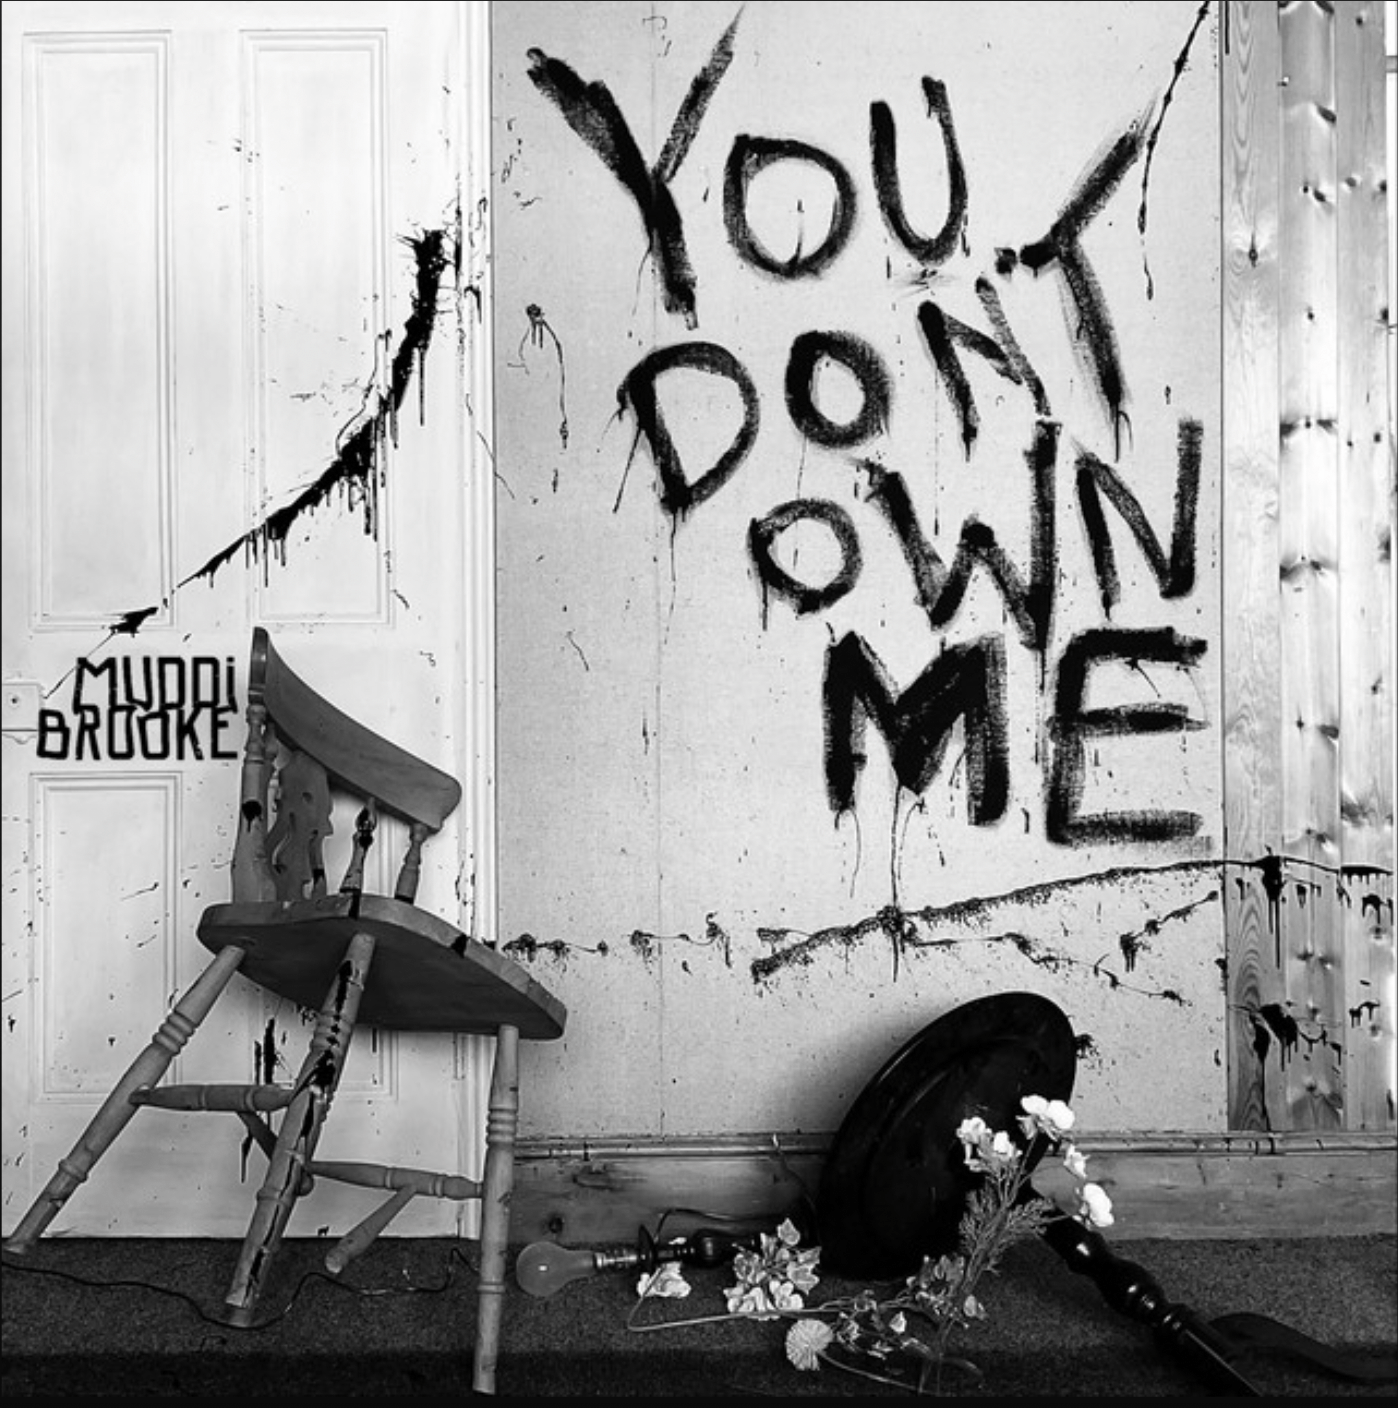 You Don't Own Me (Cover Single) by MuddiBrooke